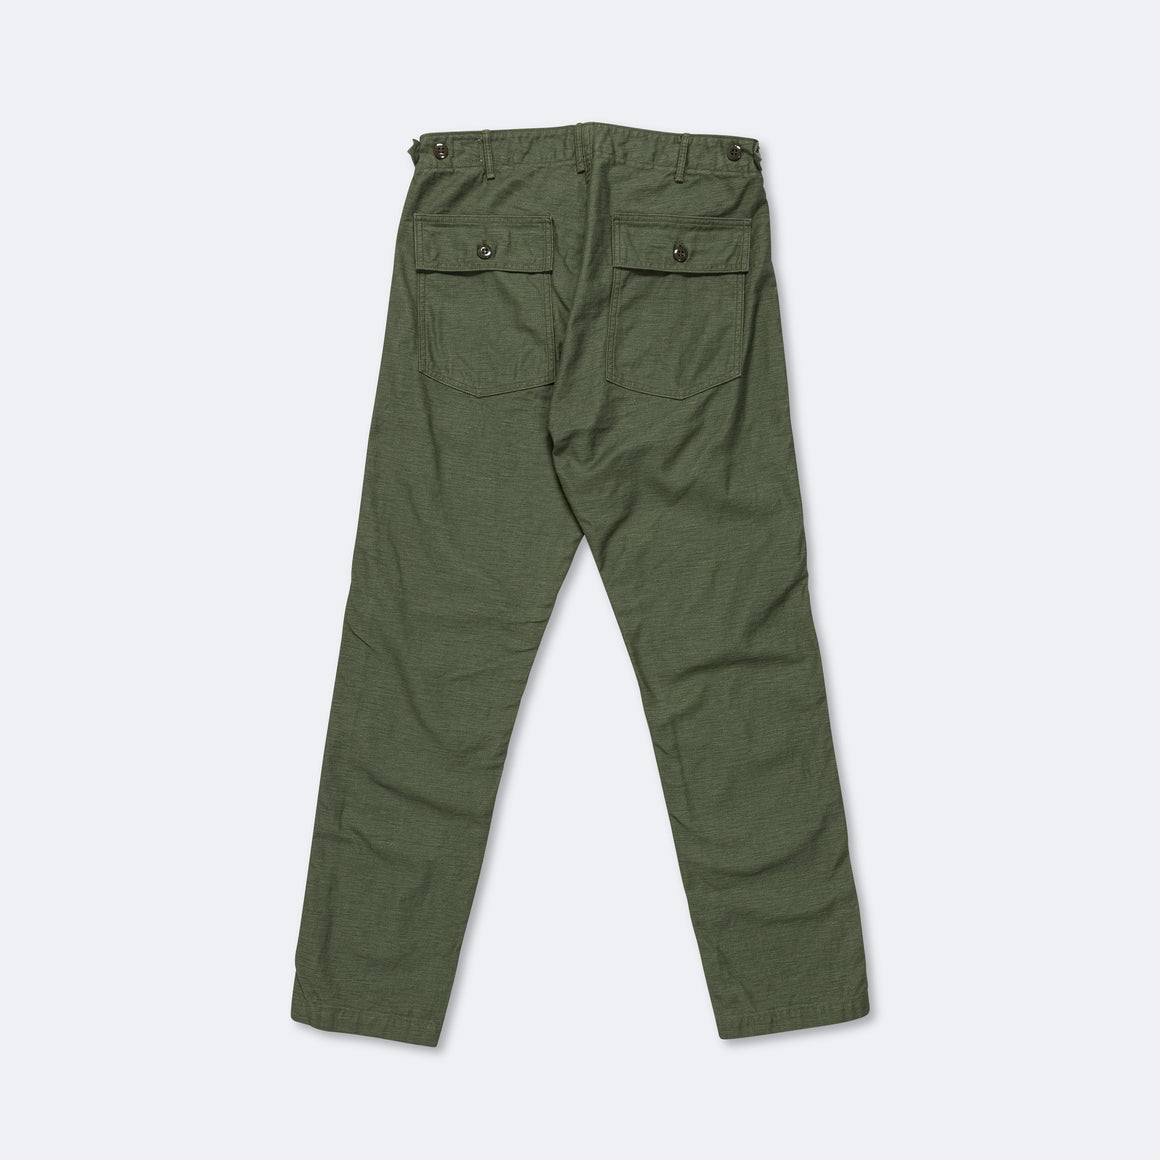 orSlow - Slim Fit Fatigue Pants - Green - UP THERE